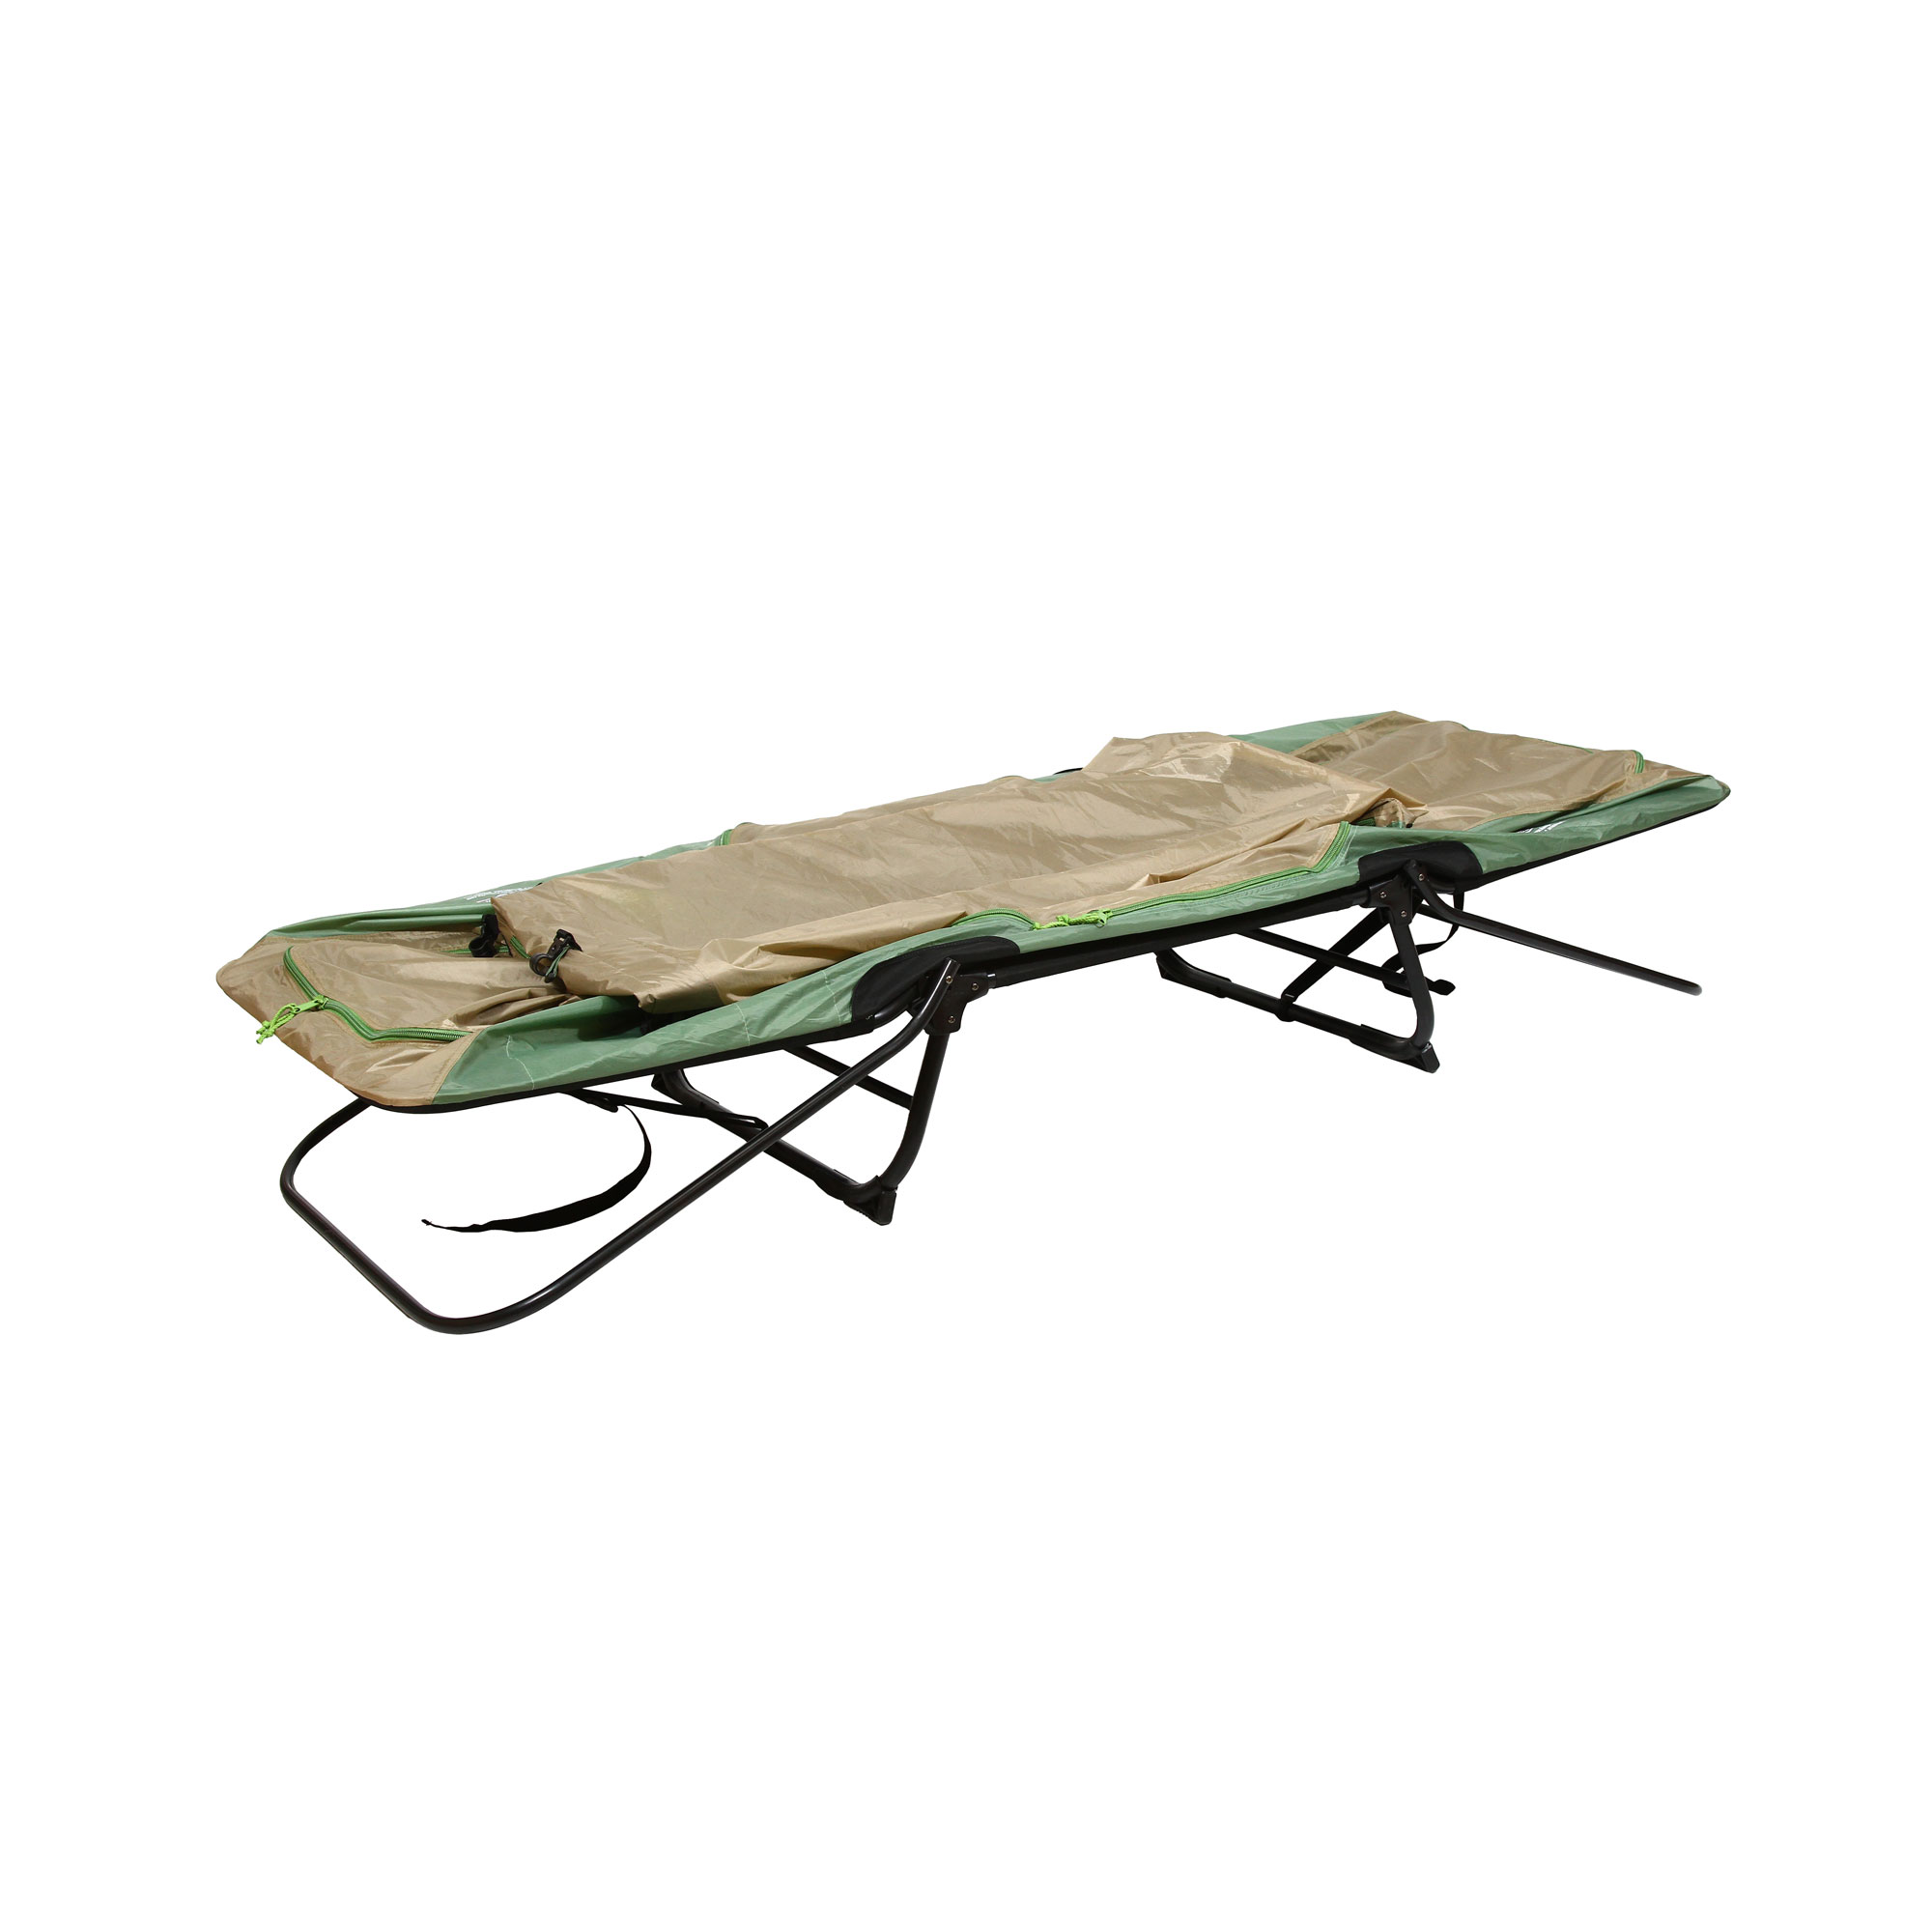 Kamp-Rite Original Tent Cot Folding Camping and Hiking Bed 1 Person (Open Box) - image 3 of 9